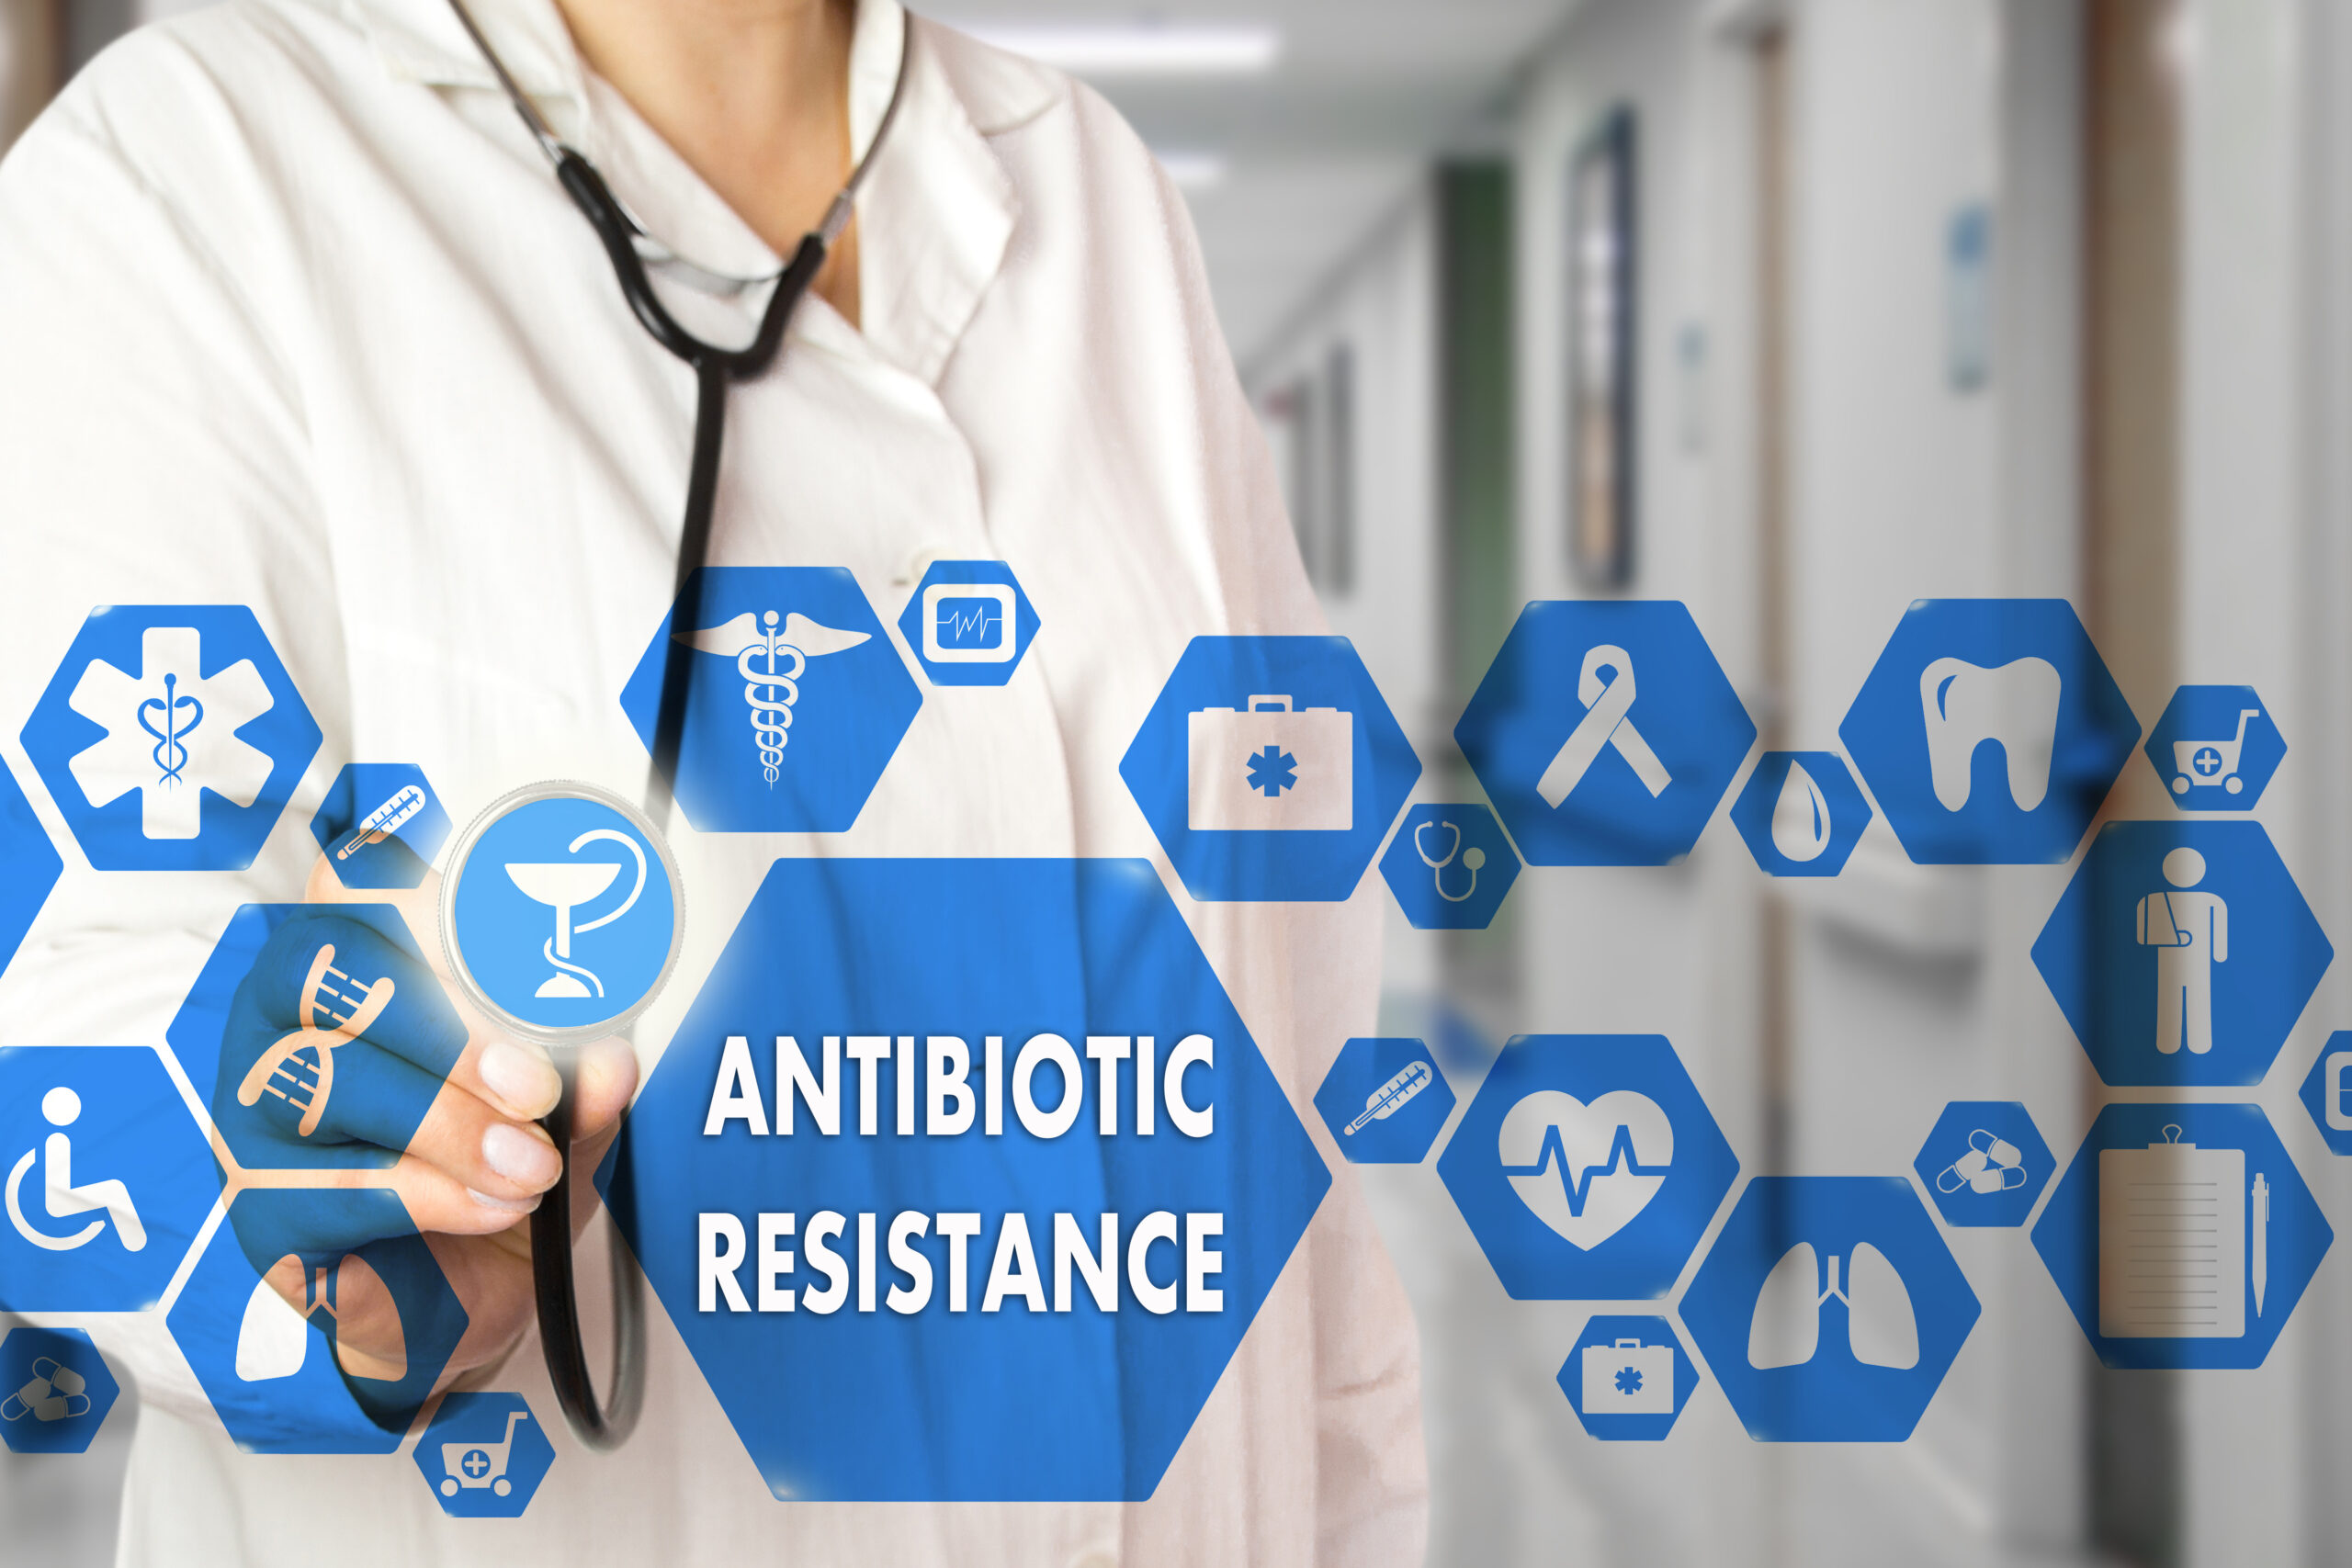 BioTech CEO Cites Antimicrobial Resistance ‘Arms Race’ Advancements as the Post-Antibiotic Era Ensues